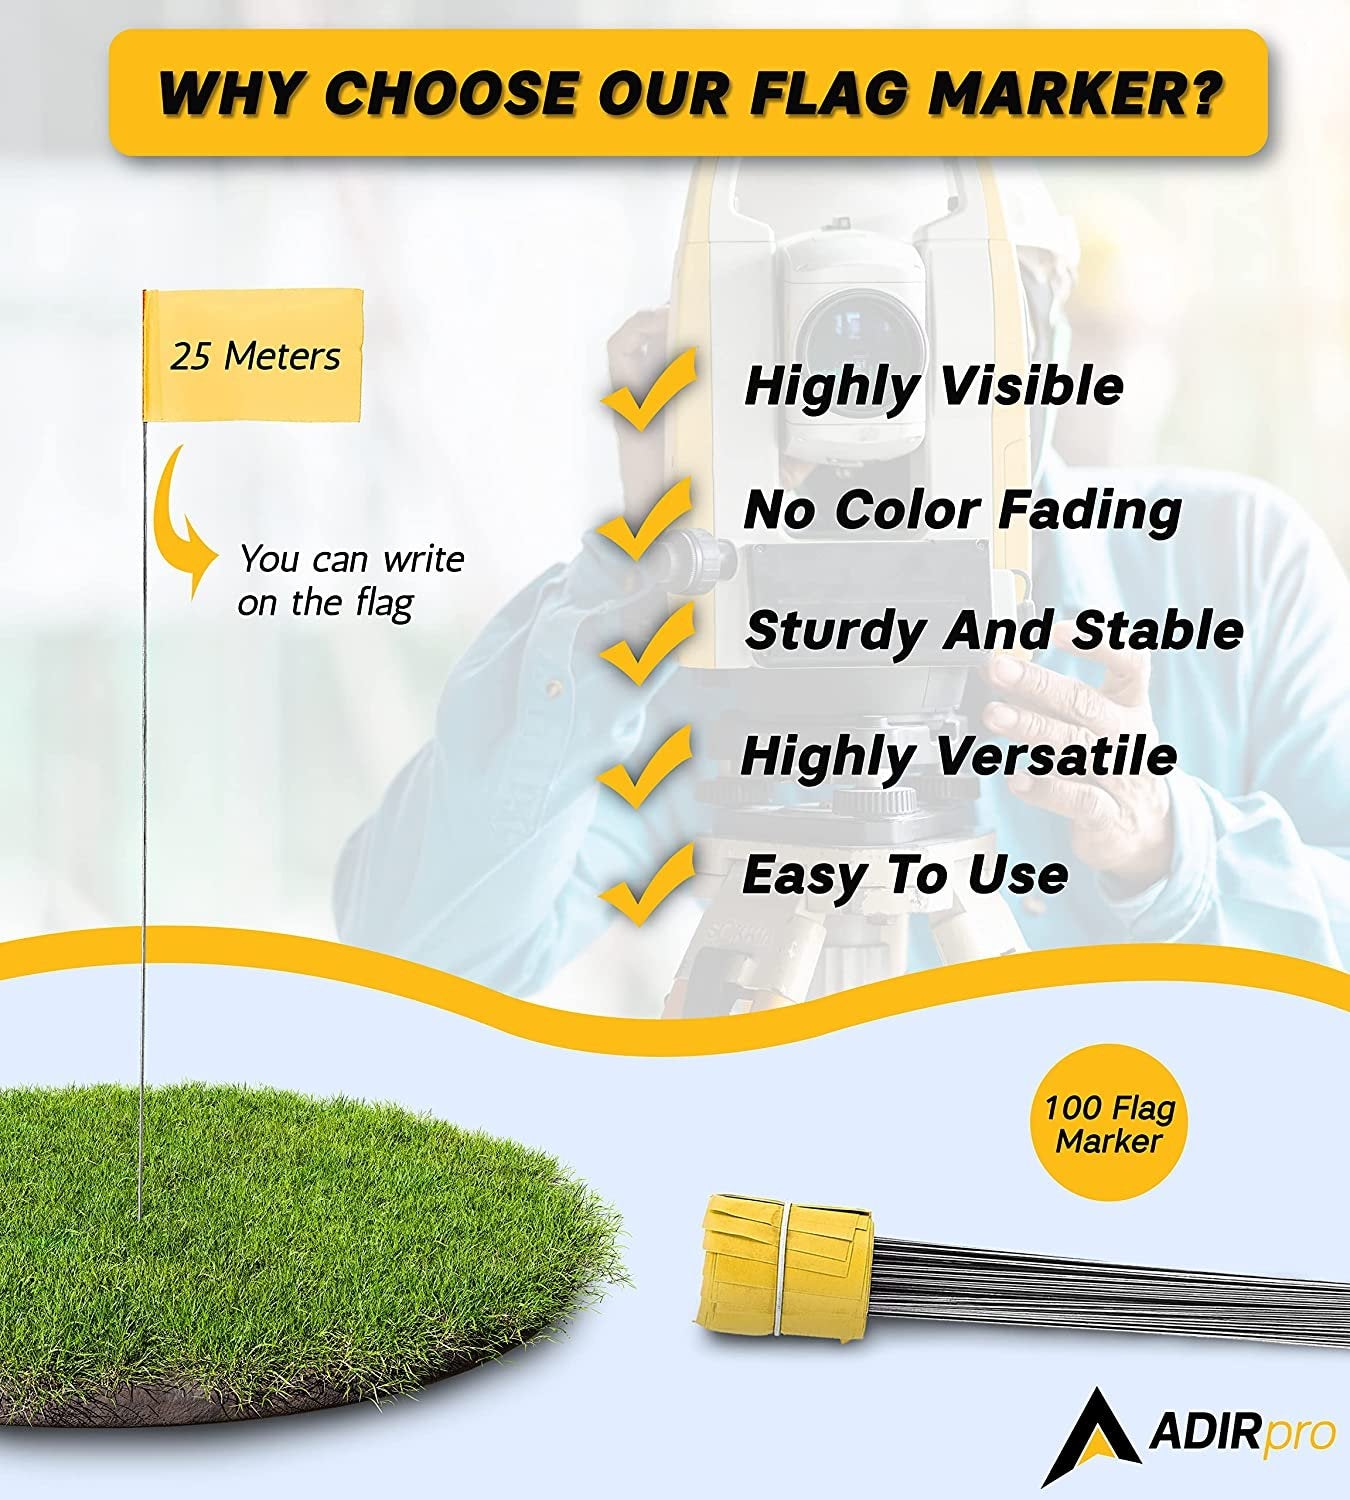 AdirPro Marking Flags 100 Pack - 2"x3" Lawn Flags - Marker Flags - Small & Thin Survey Flags - Flag Markers for Yard - Great for Ground Flags, Lawn Flags, Garden Flag Markers, Boundry Flags (Yellow)